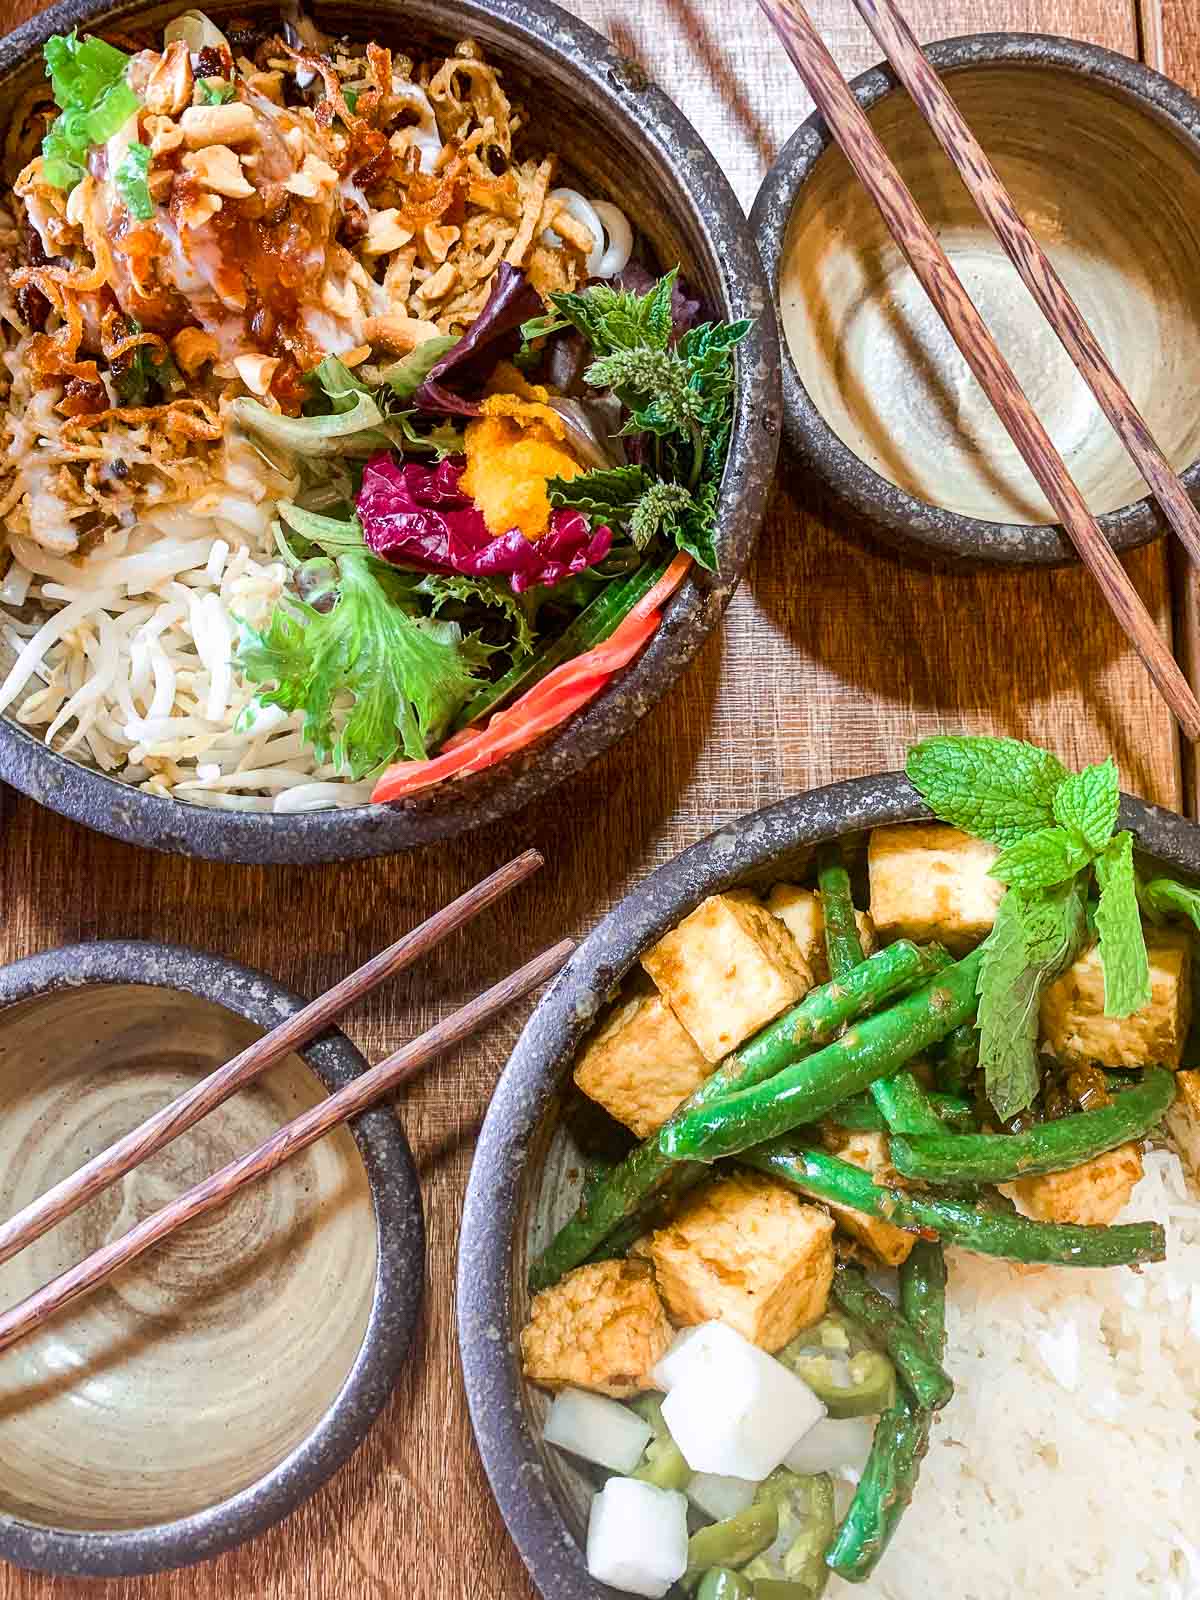 Two colourful bowls of food from a vegan restaurant are shown with chopsticks.